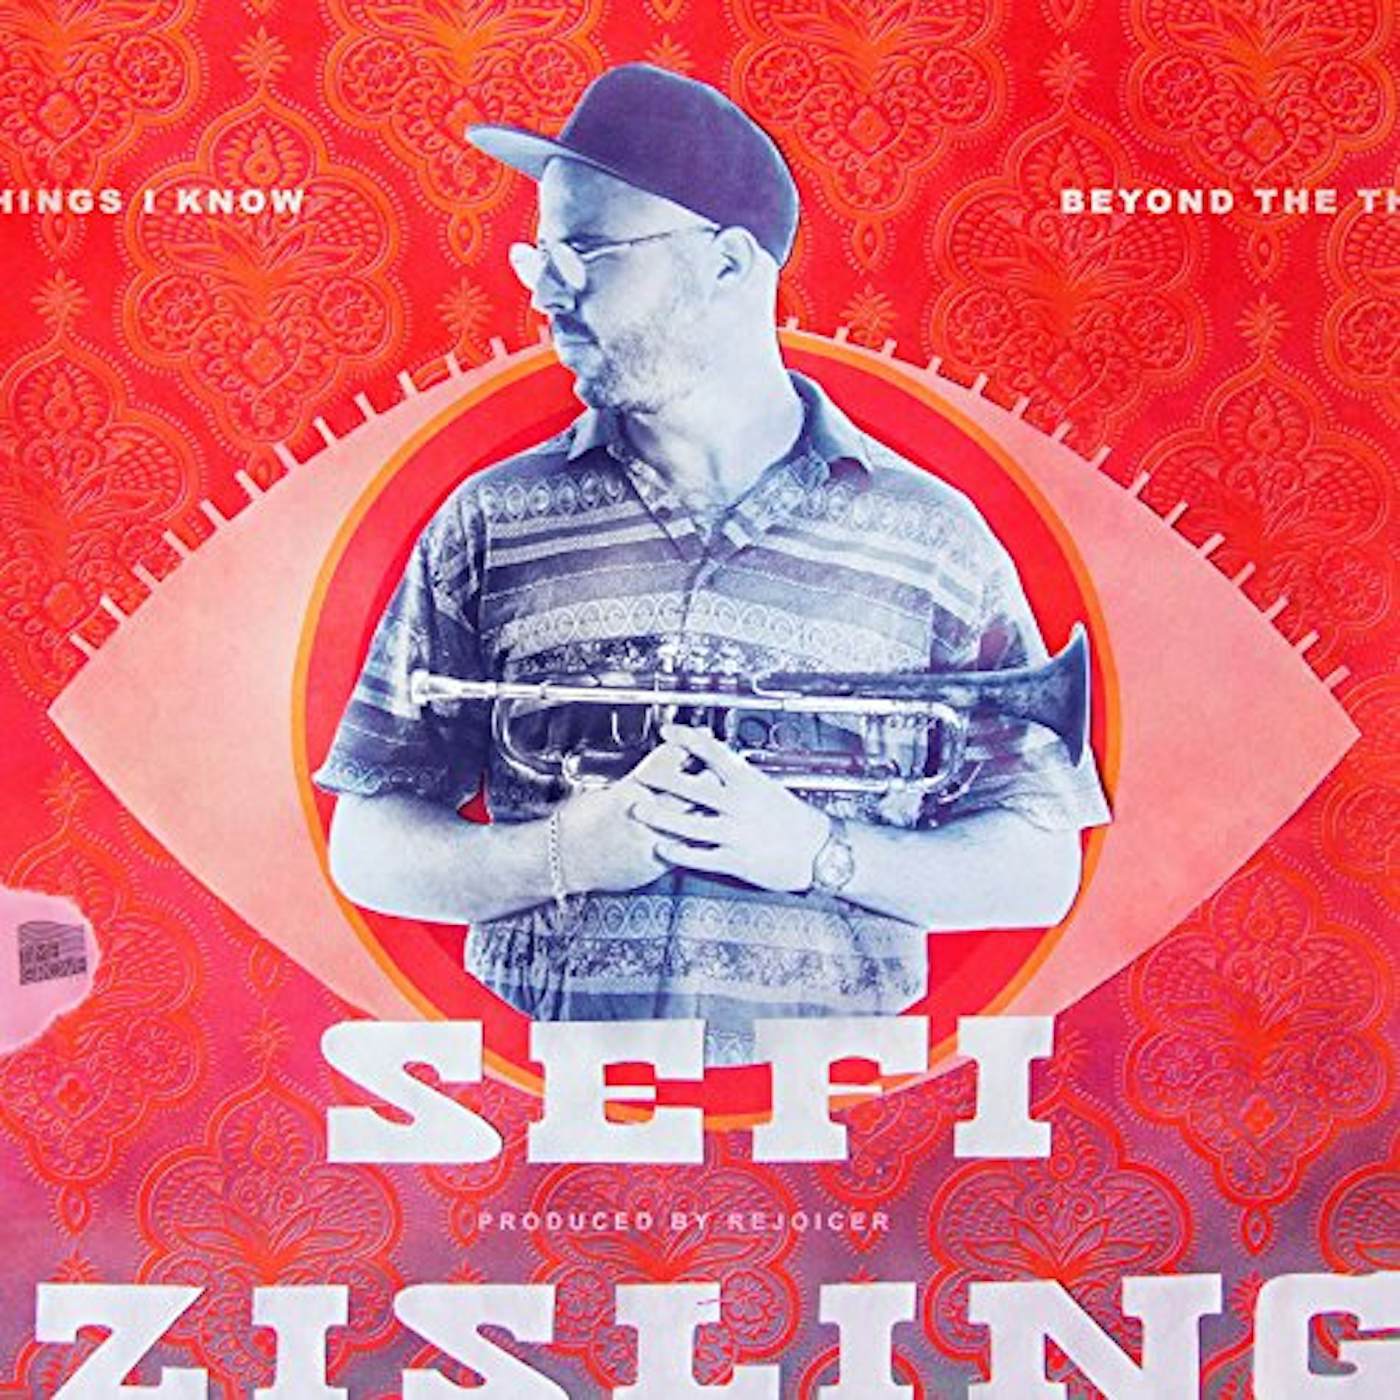 Sefi Zisling Beyond the Things I Know Vinyl Record